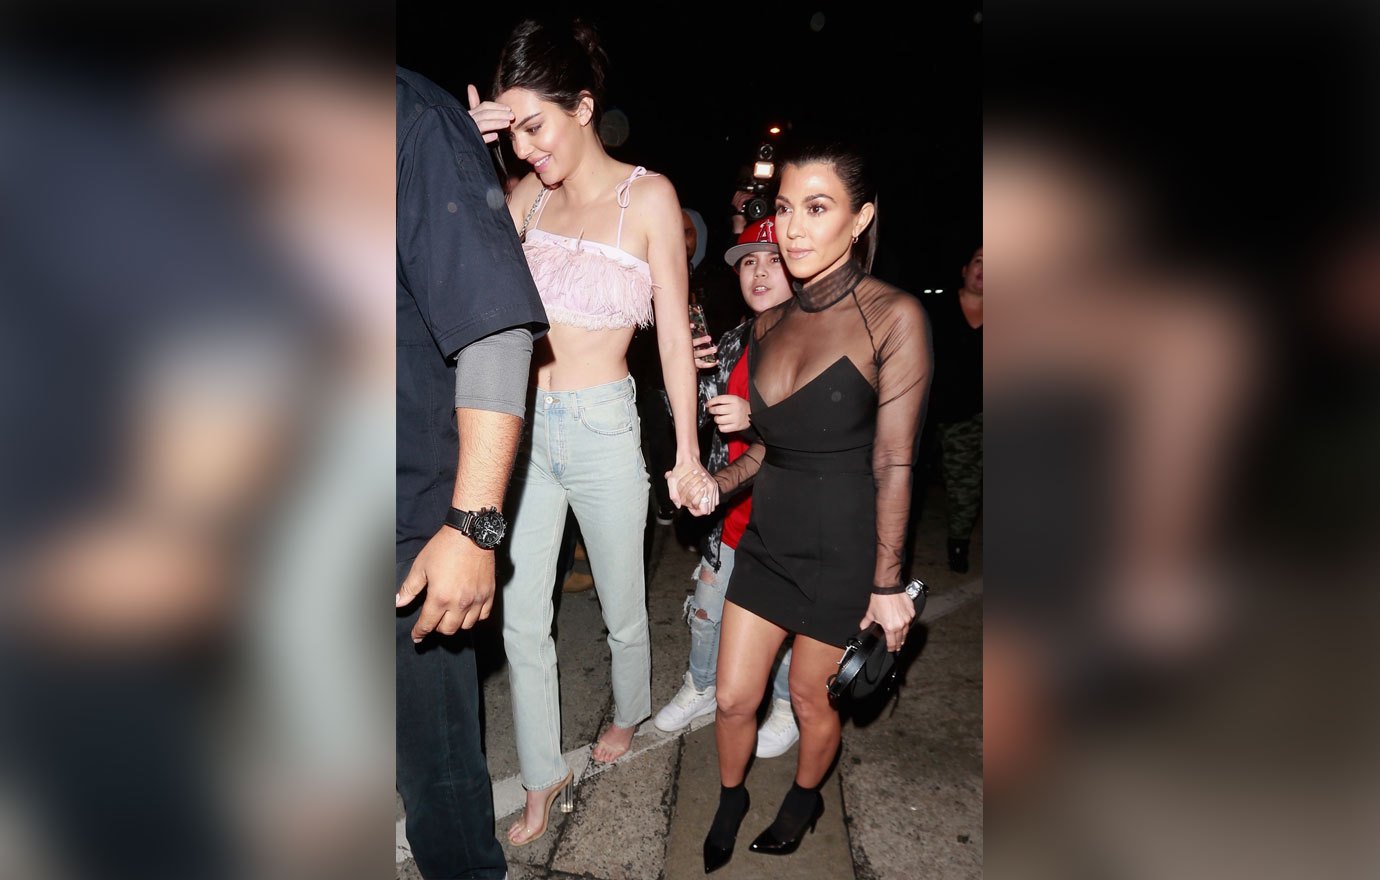 Kardashian Was Out And About With Her Sister On Sunday Night When Disaster Struck